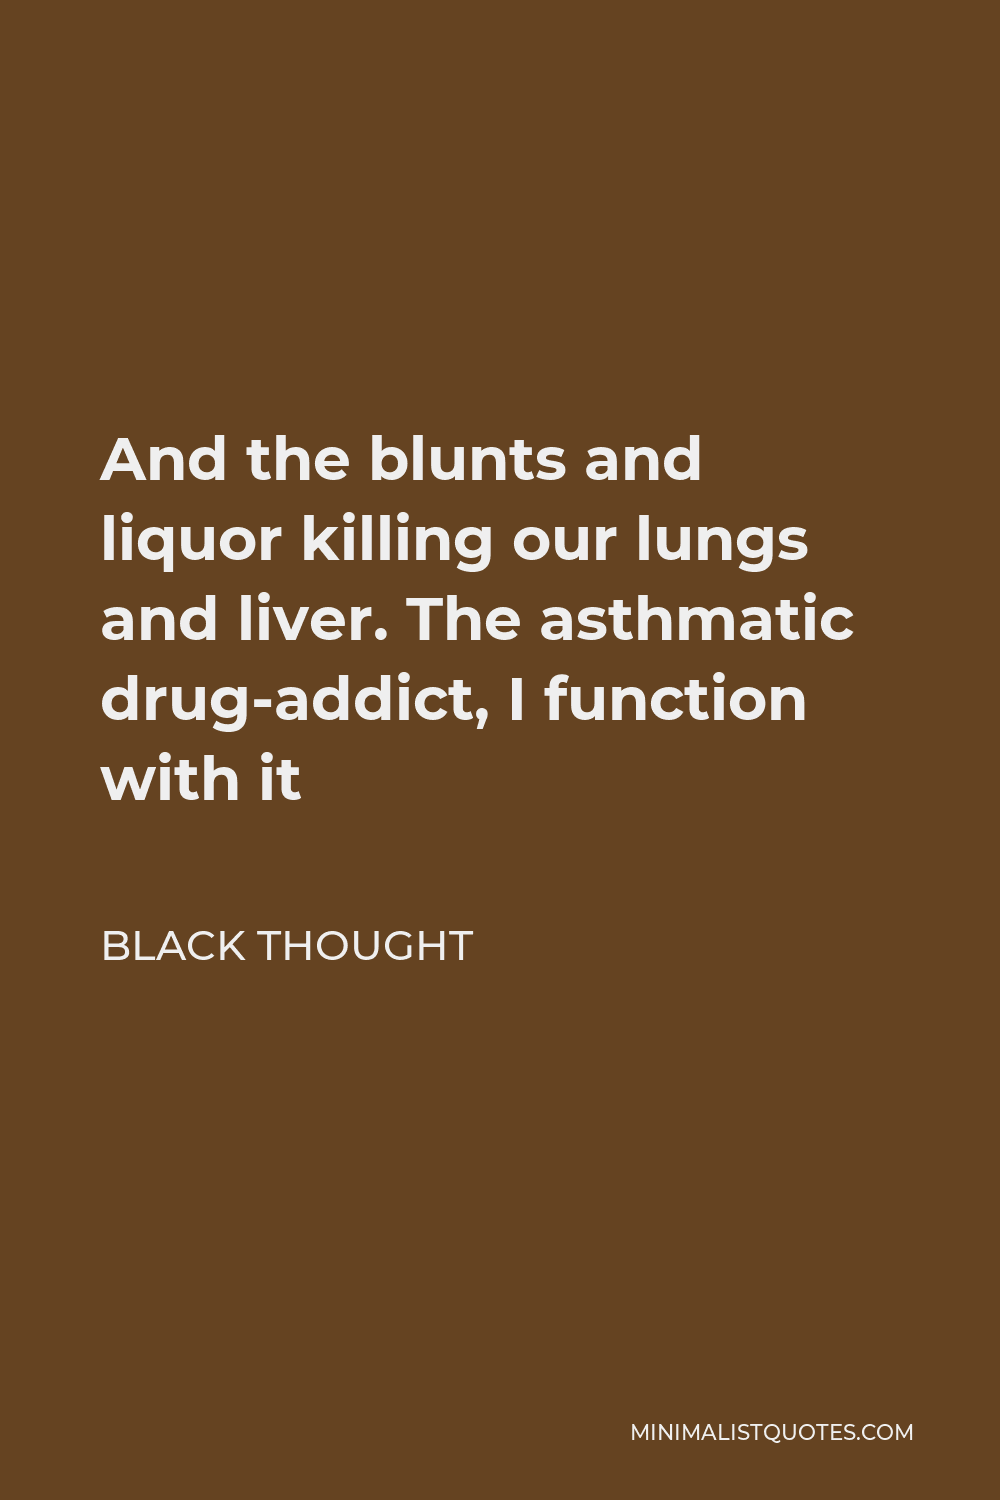 Black Thought Quote - And the blunts and liquor killing our lungs and liver. The asthmatic drug-addict, I function with it